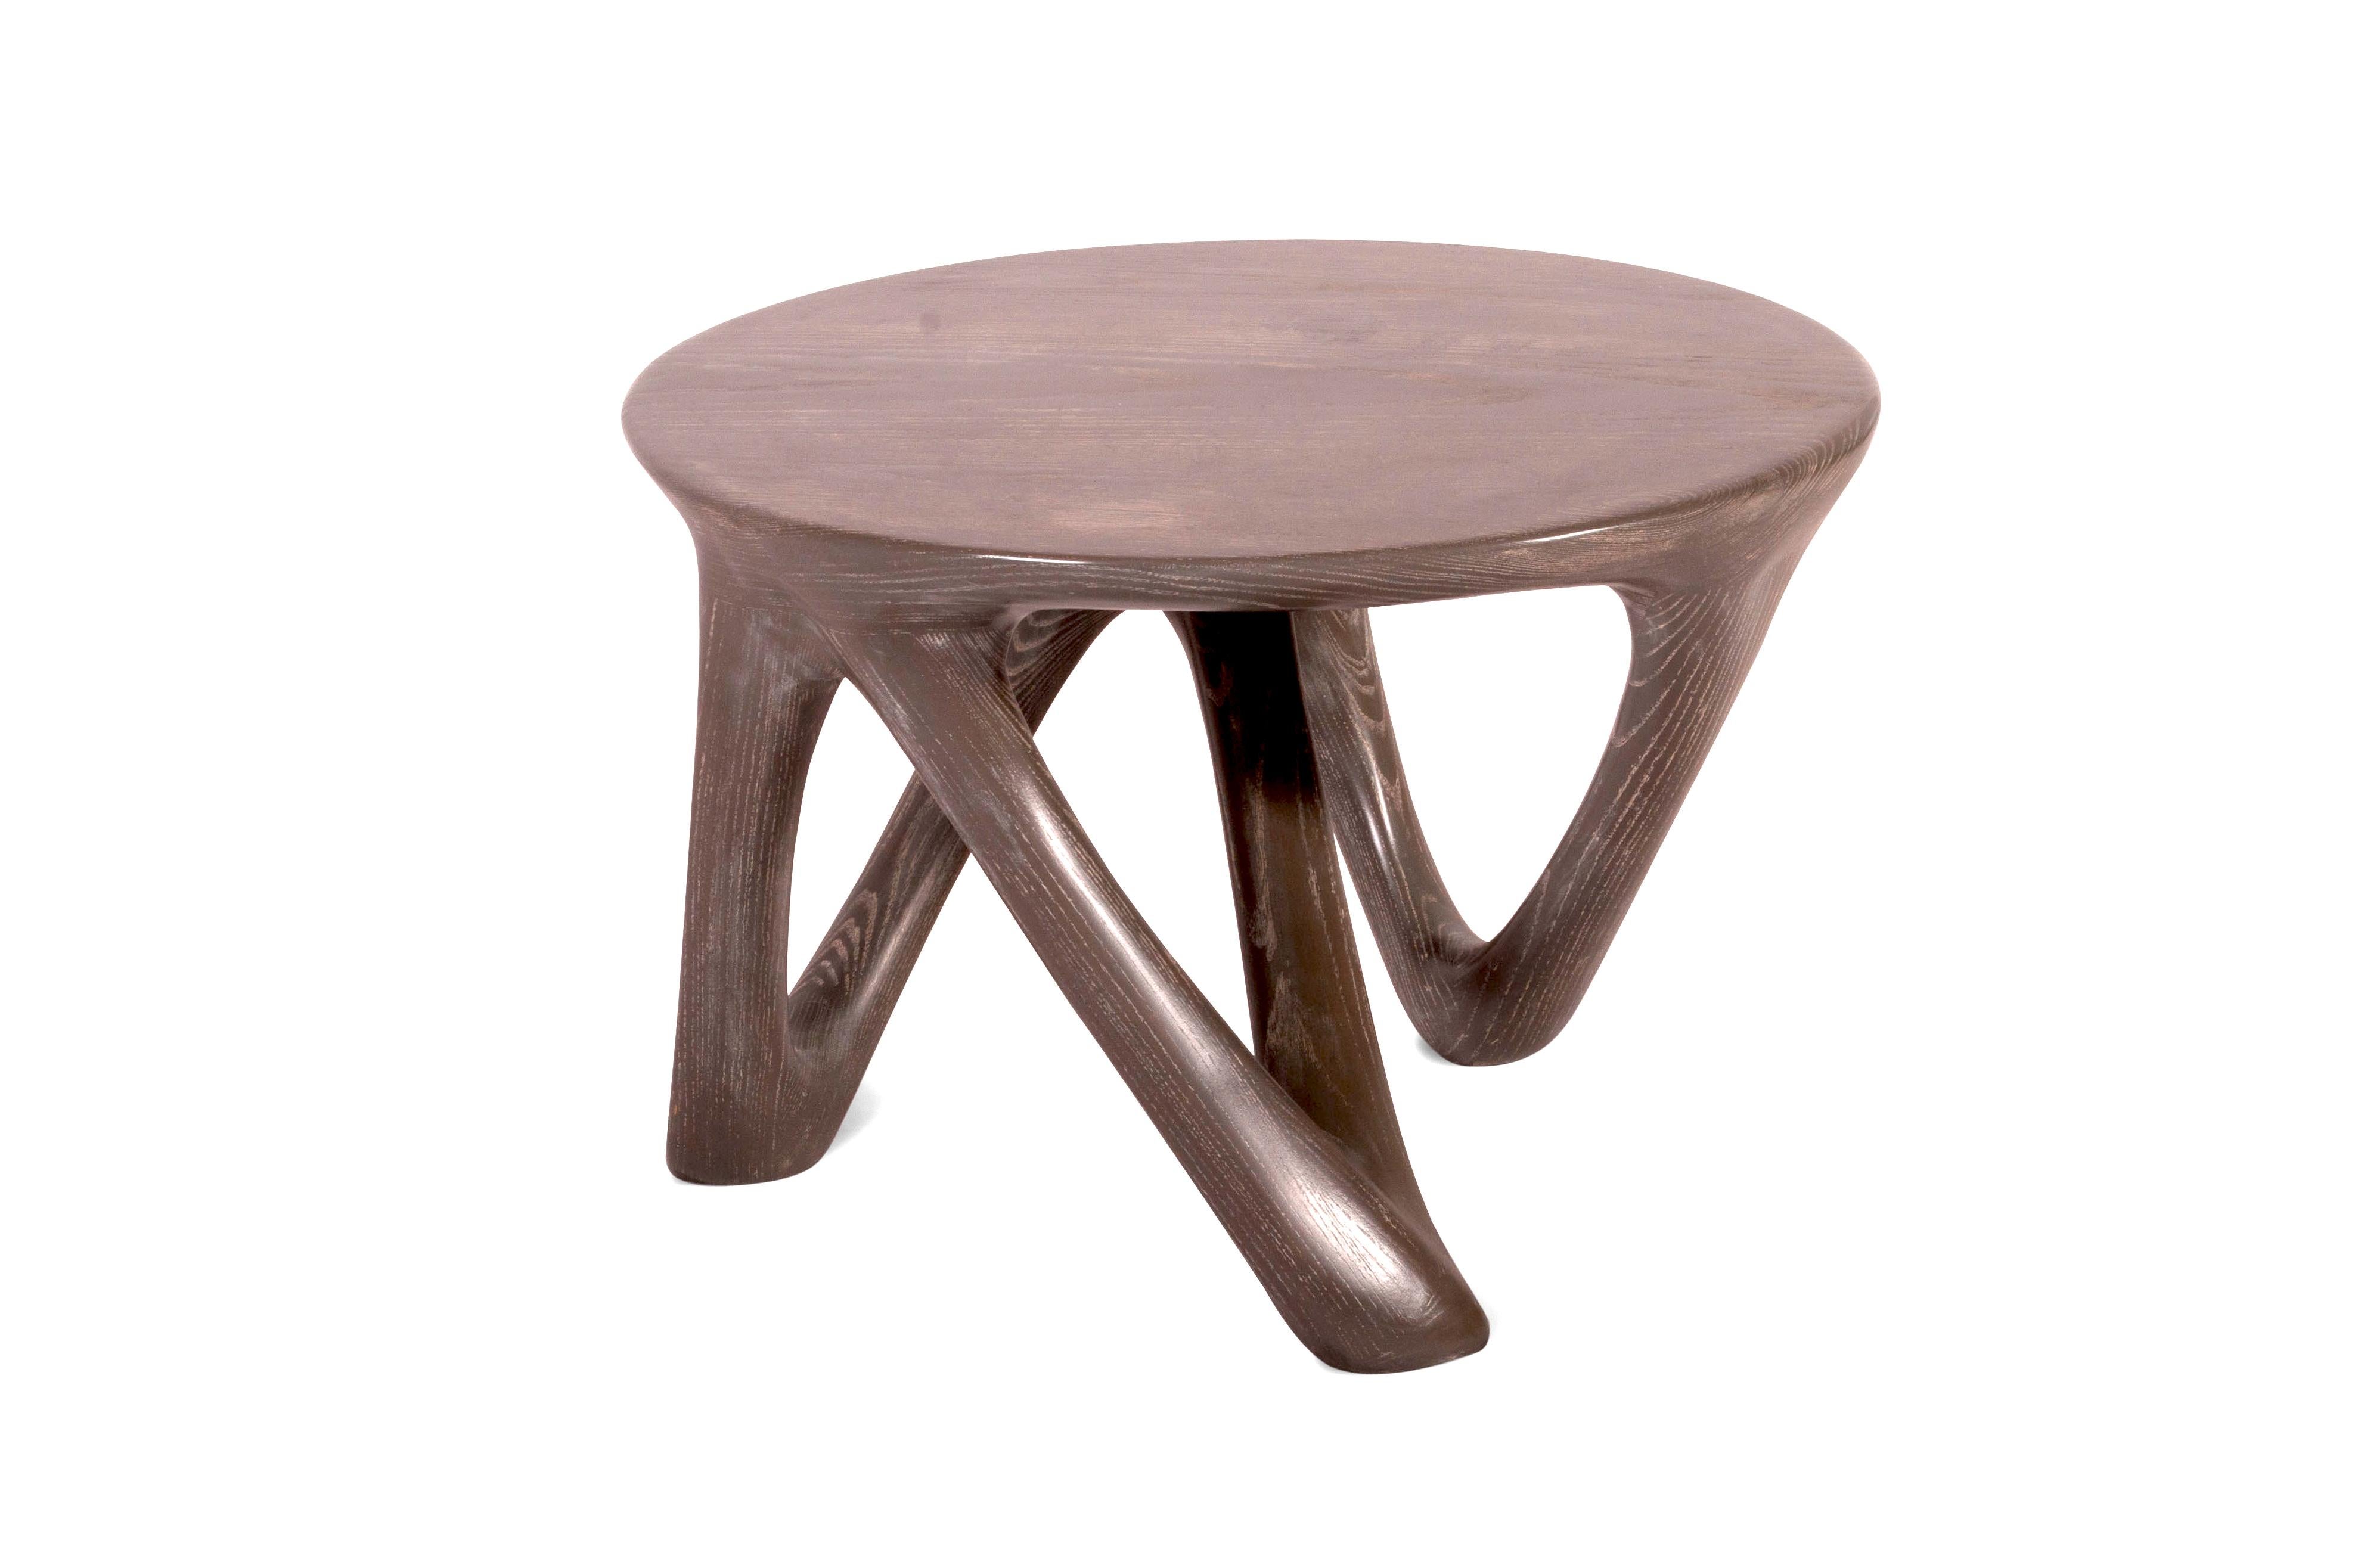 American Amorph Ya Modern Side Table in Mesa Stain on Solid Wood For Sale